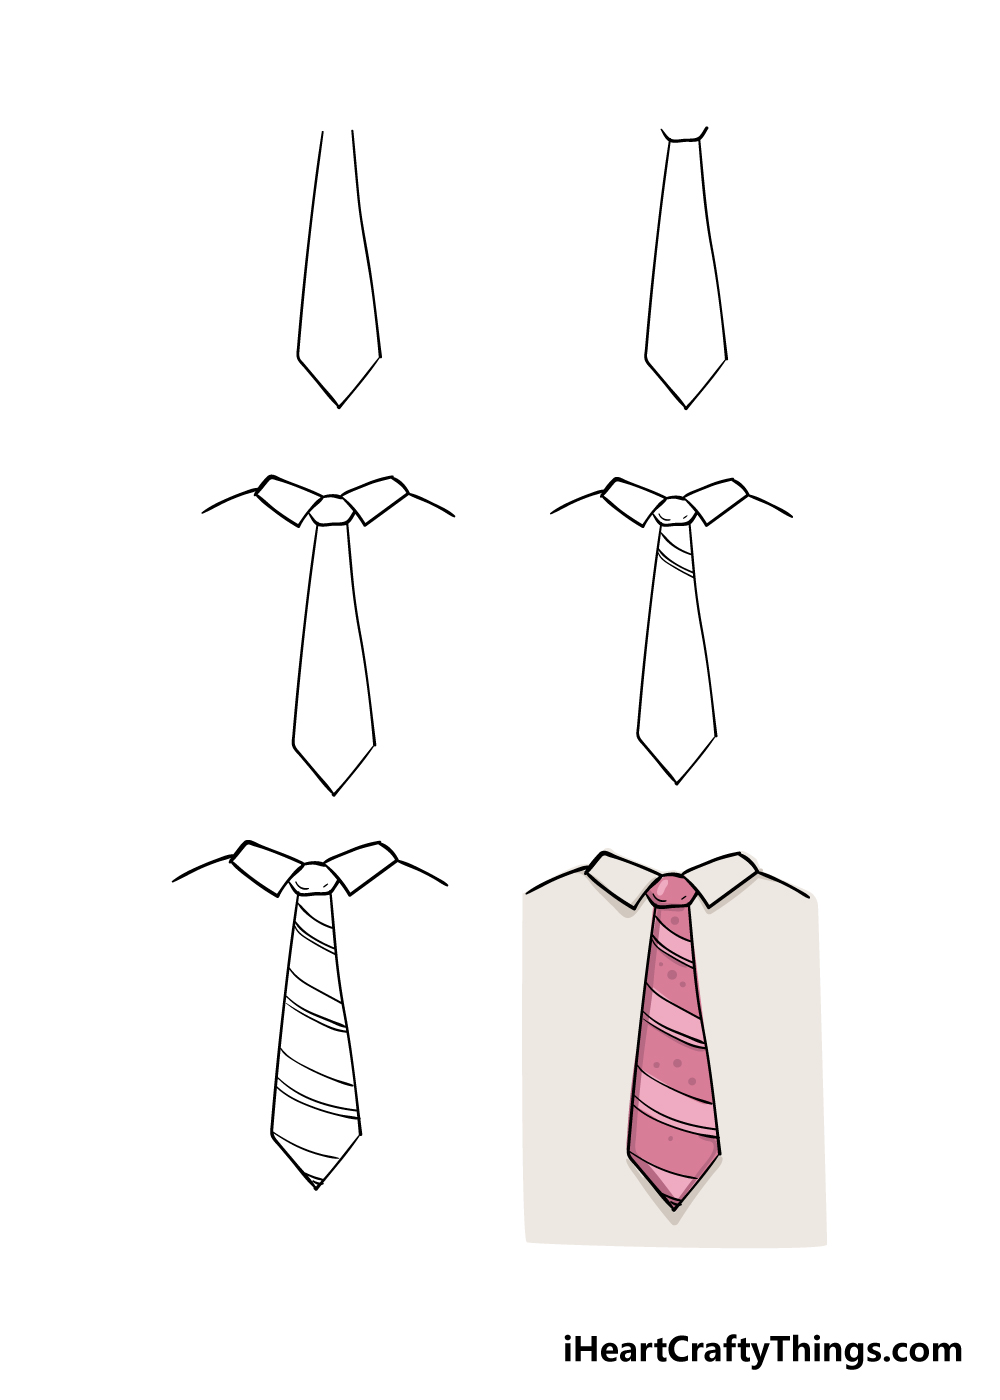 how to draw a tie in 6 steps